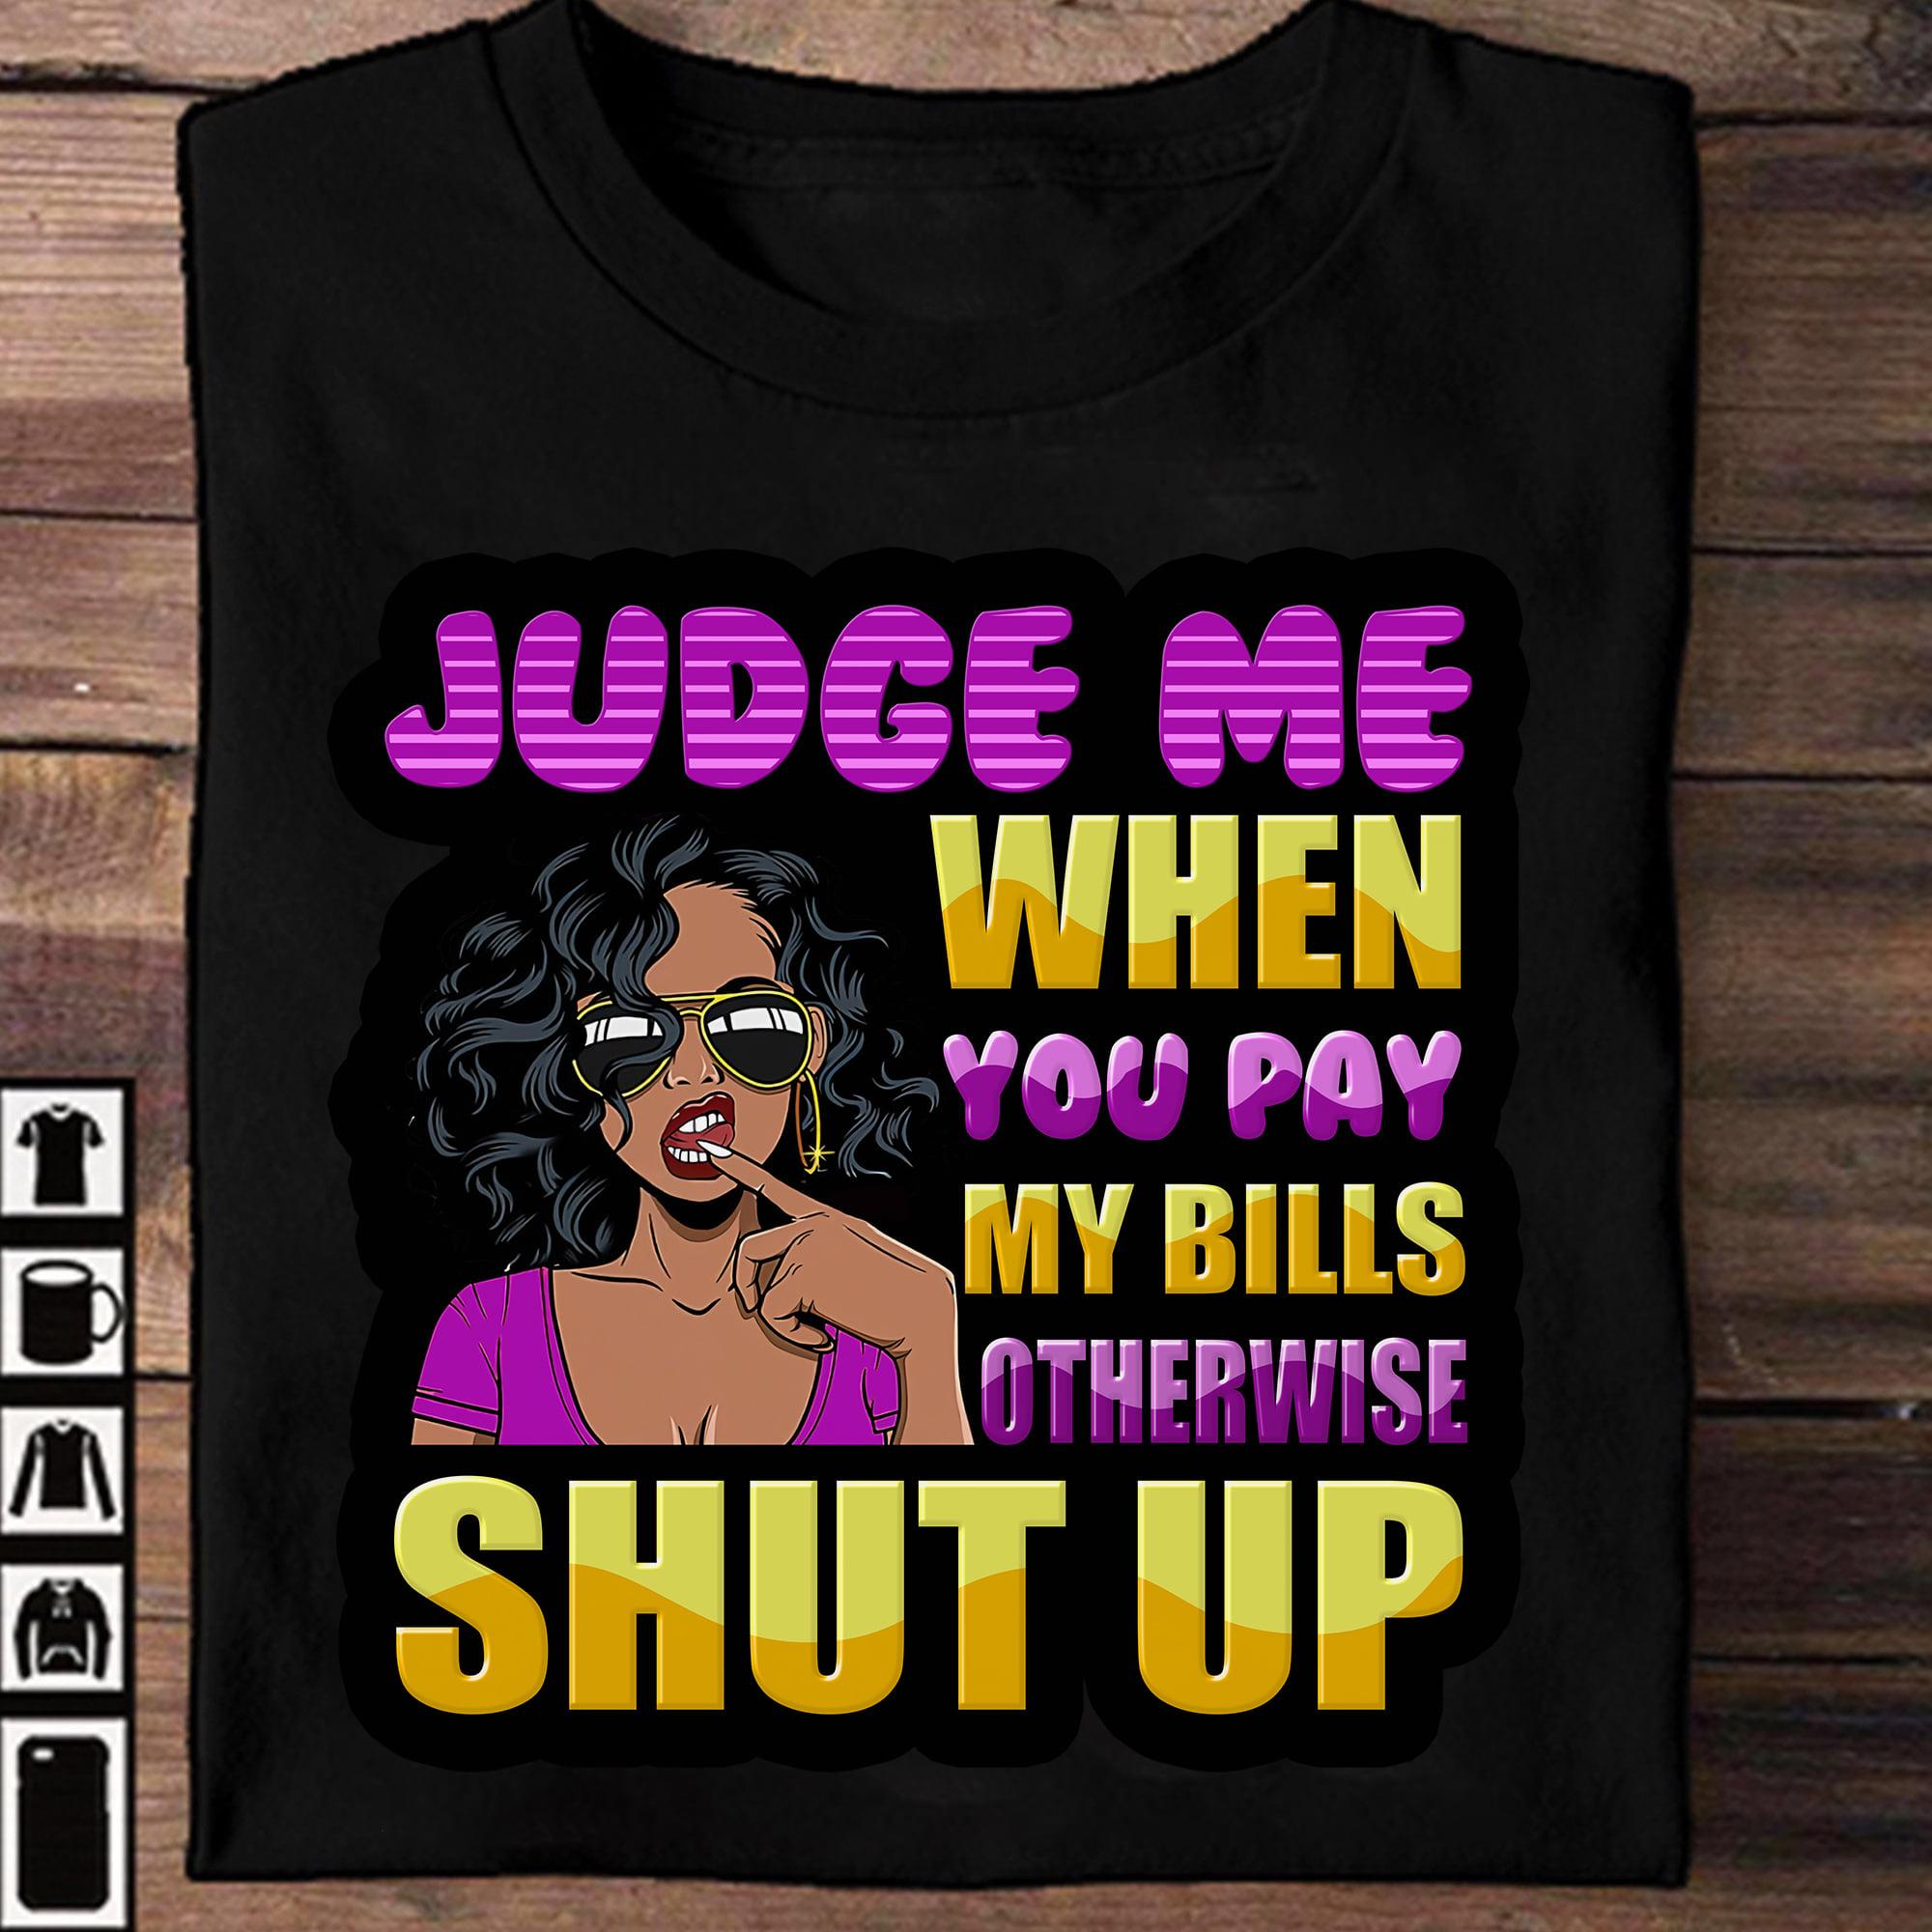 Judge me when you pay my bills otherwise shut up - Black community, beautiful black woman